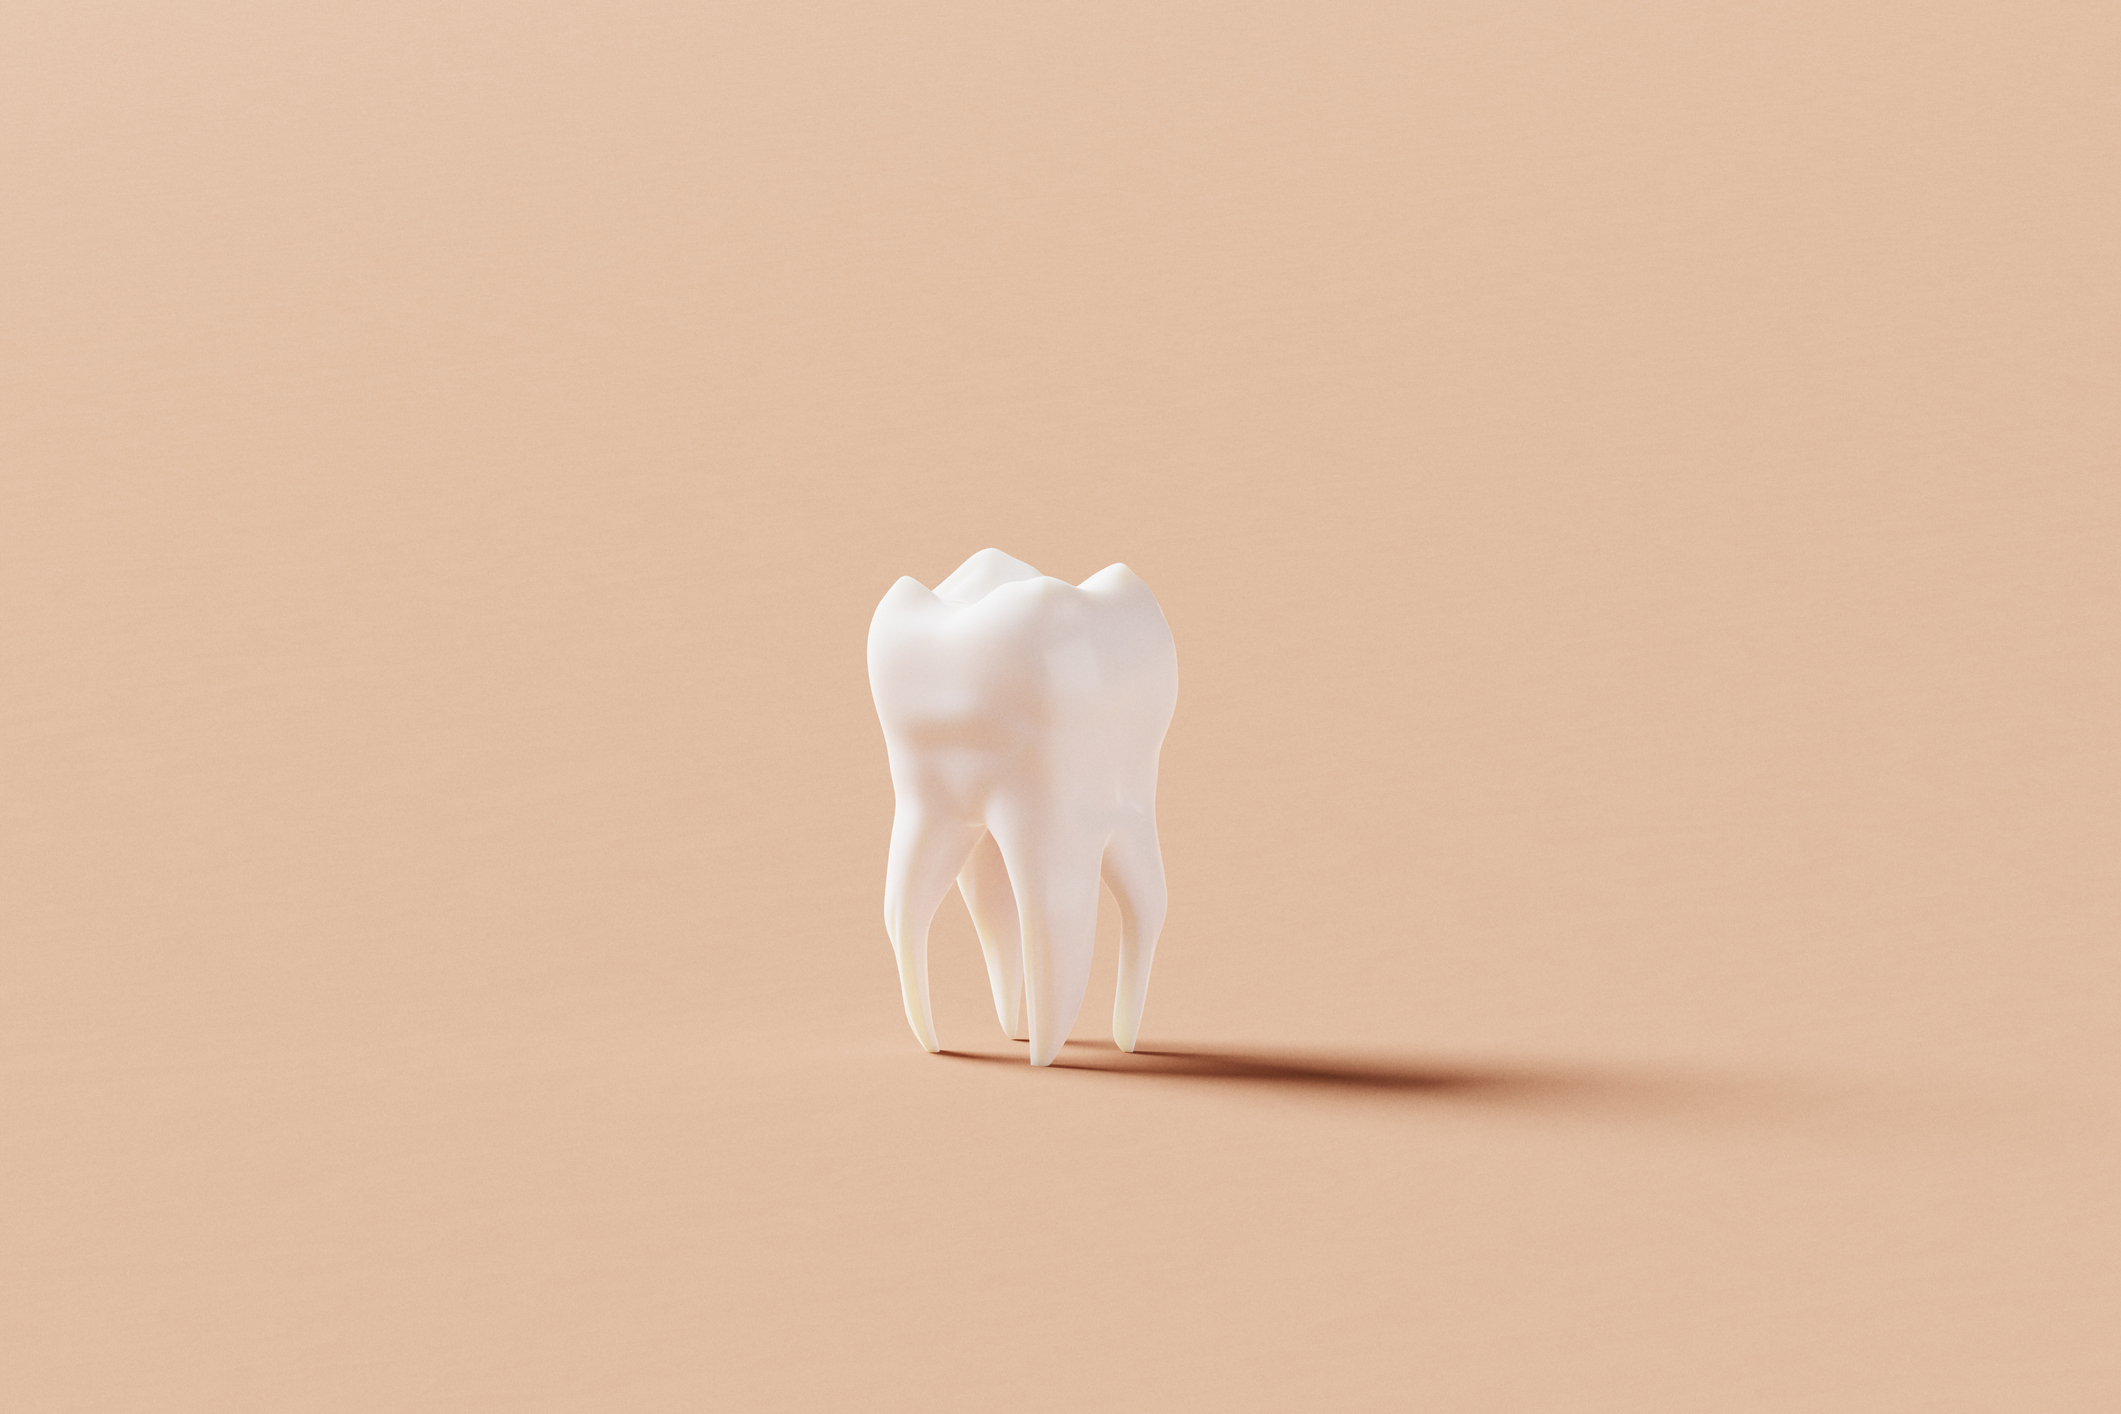 A close-up image of a single white molar tooth with a smooth, shiny surface, standing upright on a light backdrop